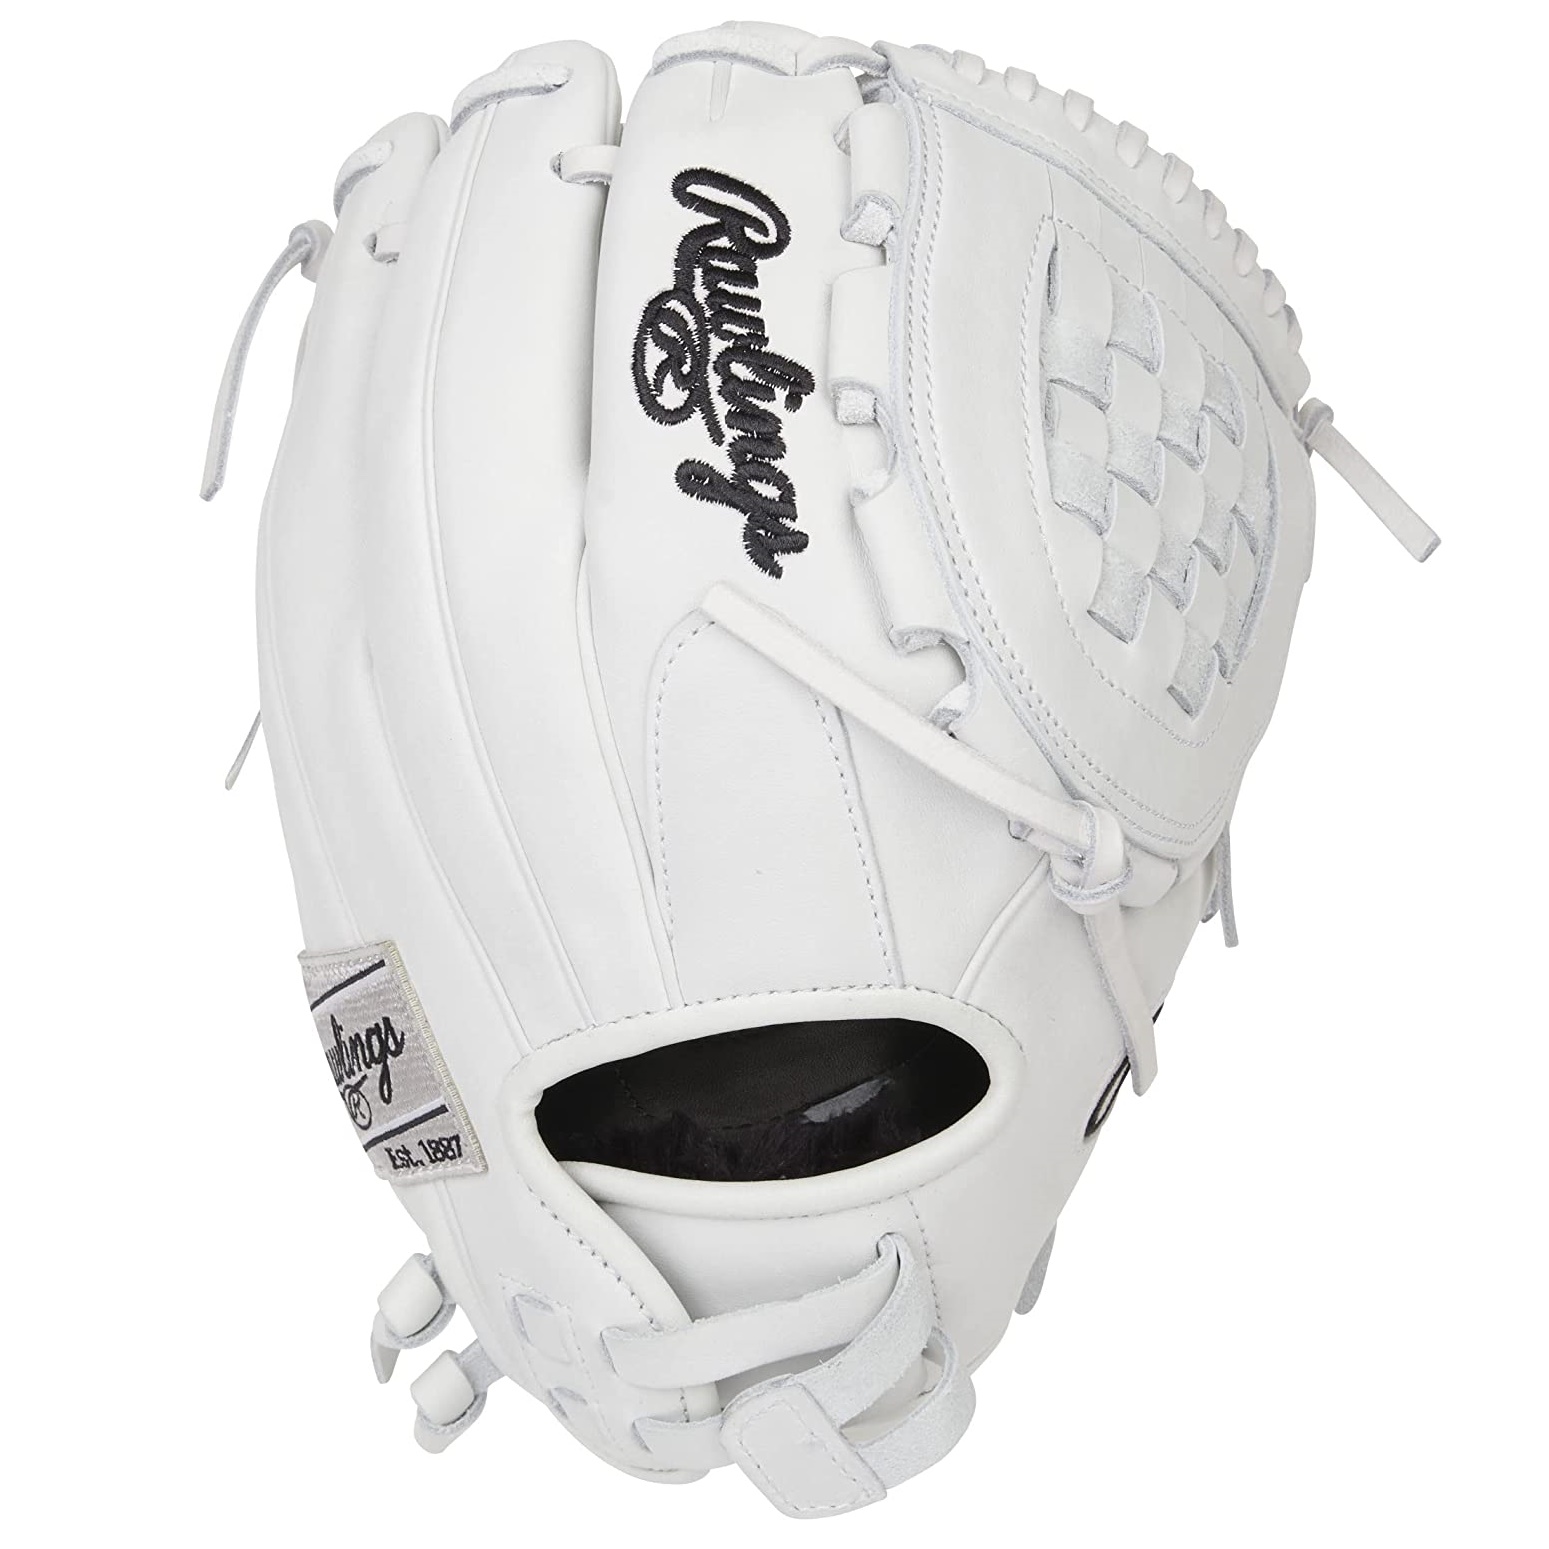 rawlings-liberty-advanced-softball-glove-11-5-inch-basket-web-white-right-hand-throw RLA115-3W-RightHandThrow Rawlings  <p><span style=font-size large;>The Rawlings Liberty Advanced 11.5-inch softball glove offers fastpitch